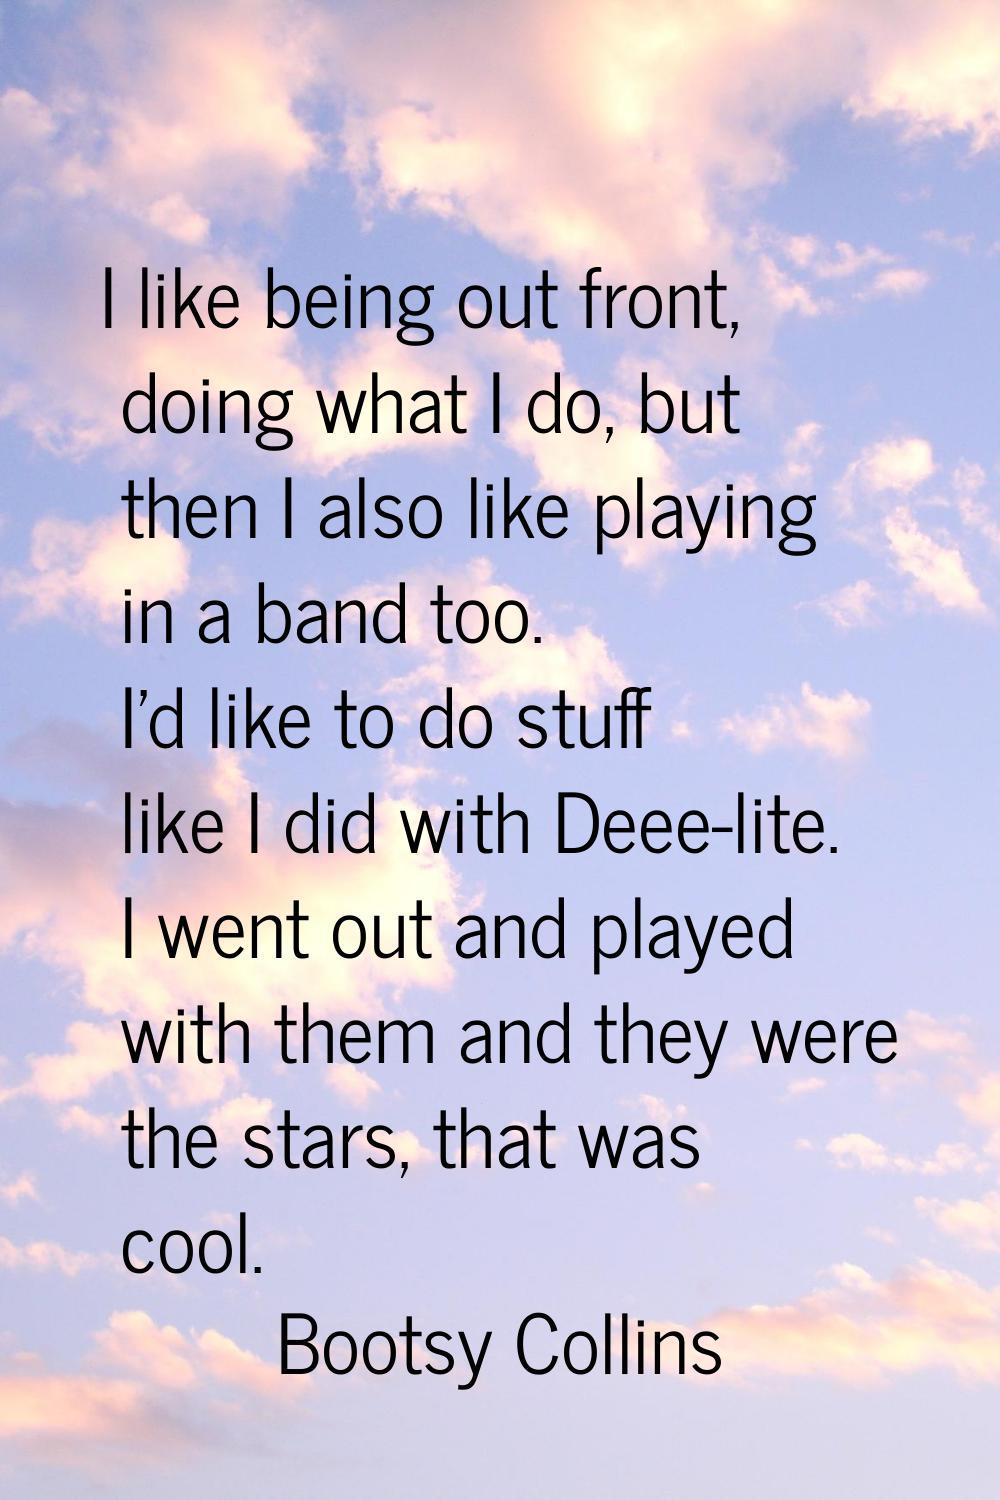 I like being out front, doing what I do, but then I also like playing in a band too. I'd like to do